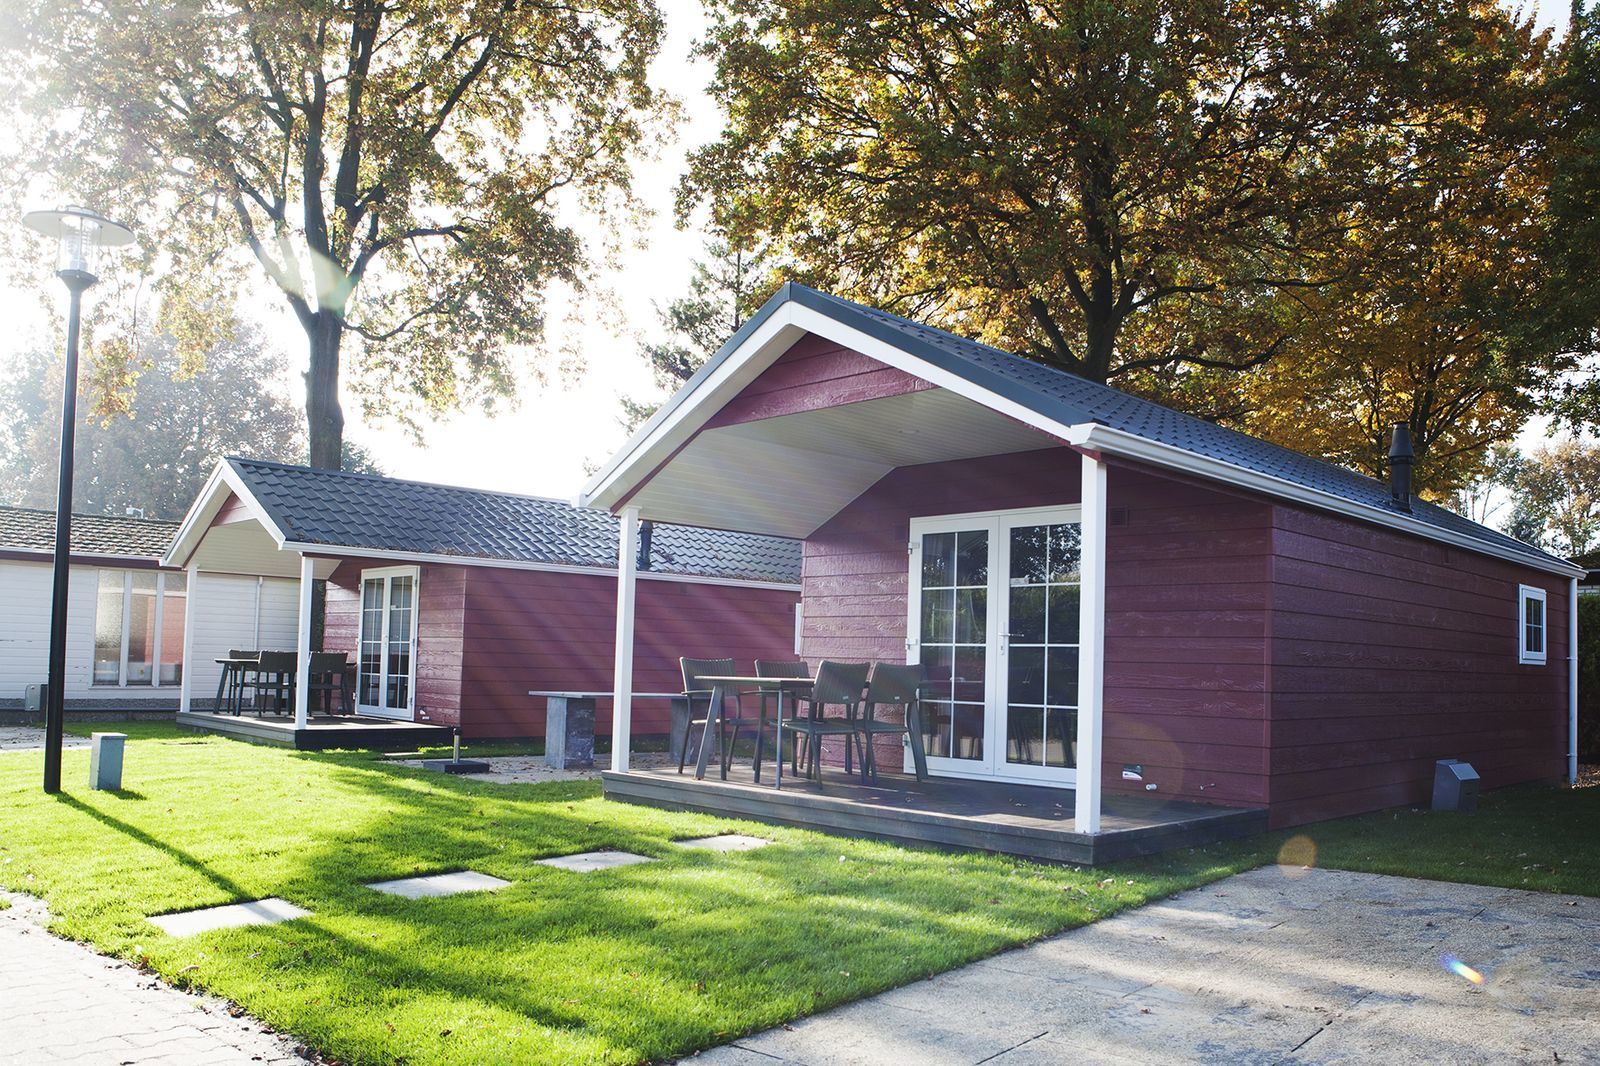 Book your own chalet and enjoy the Veluwe